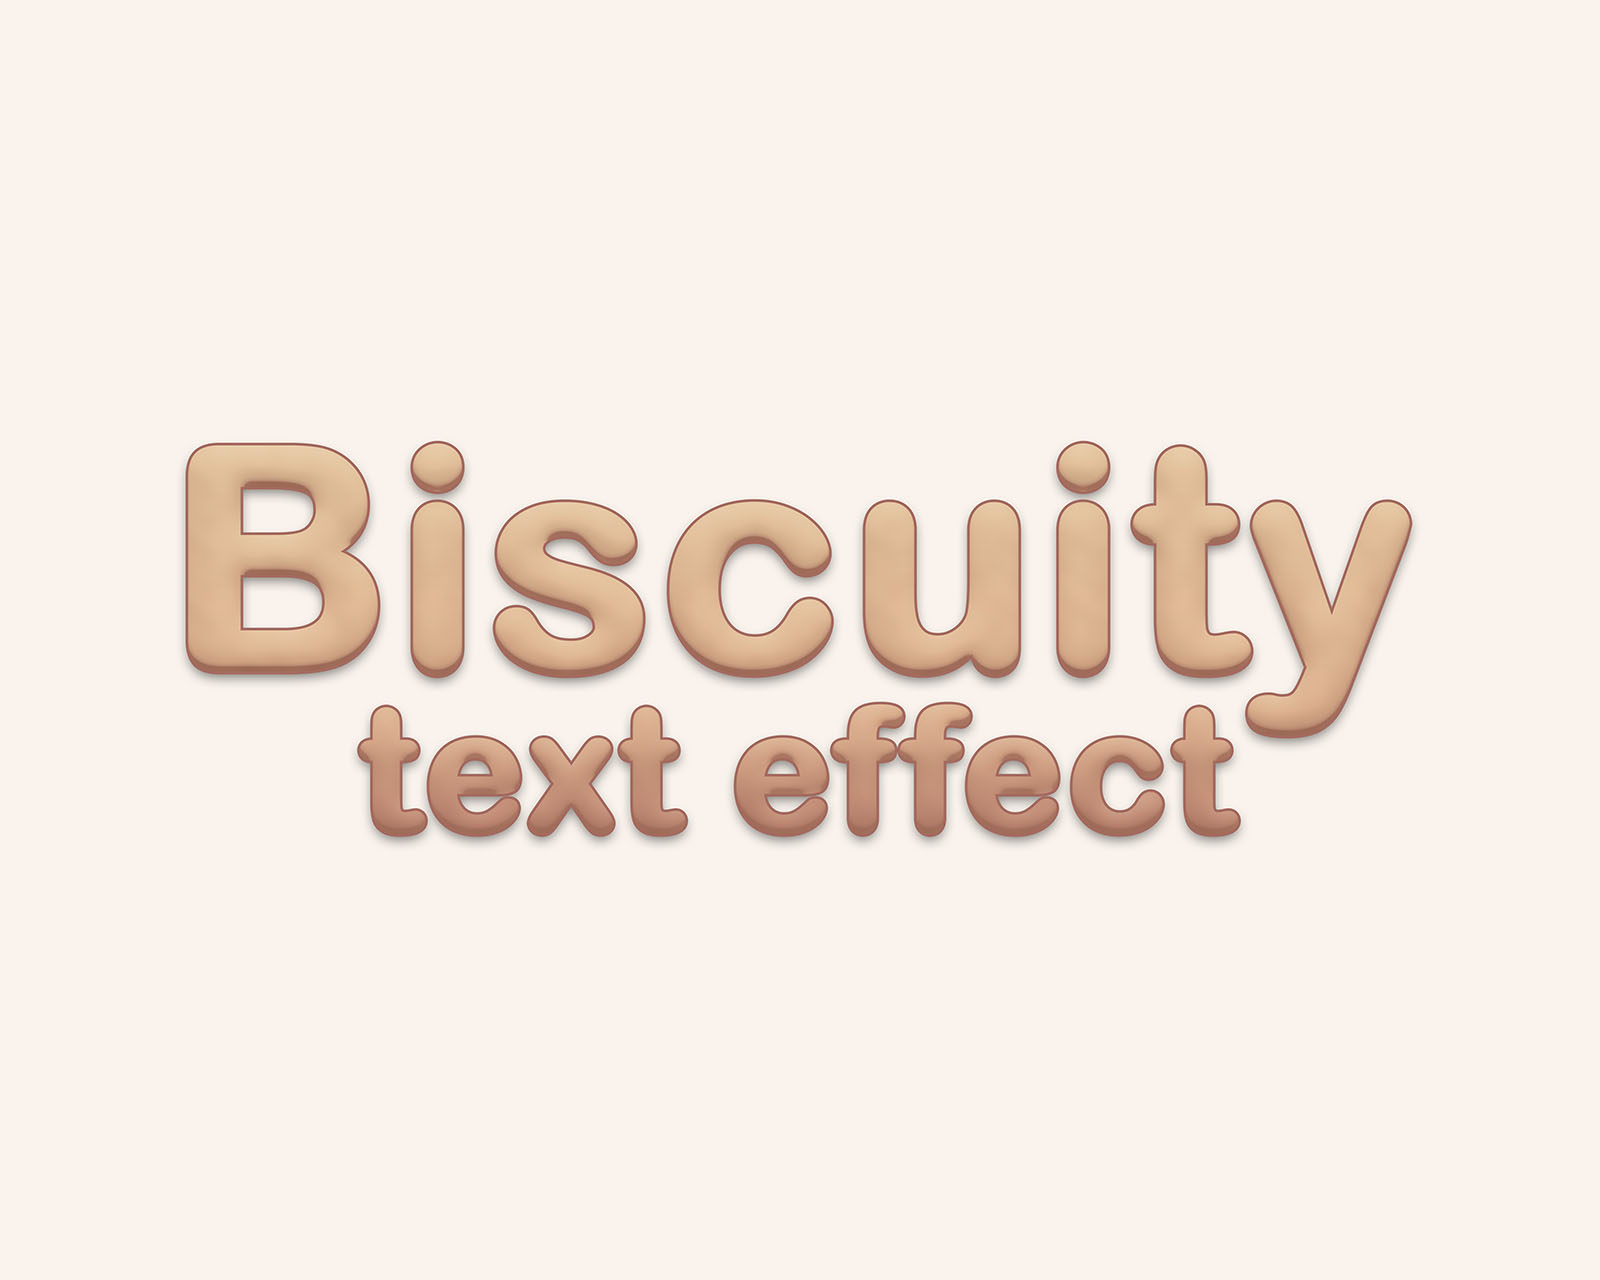 Photoshop Biscuit text effects and styles